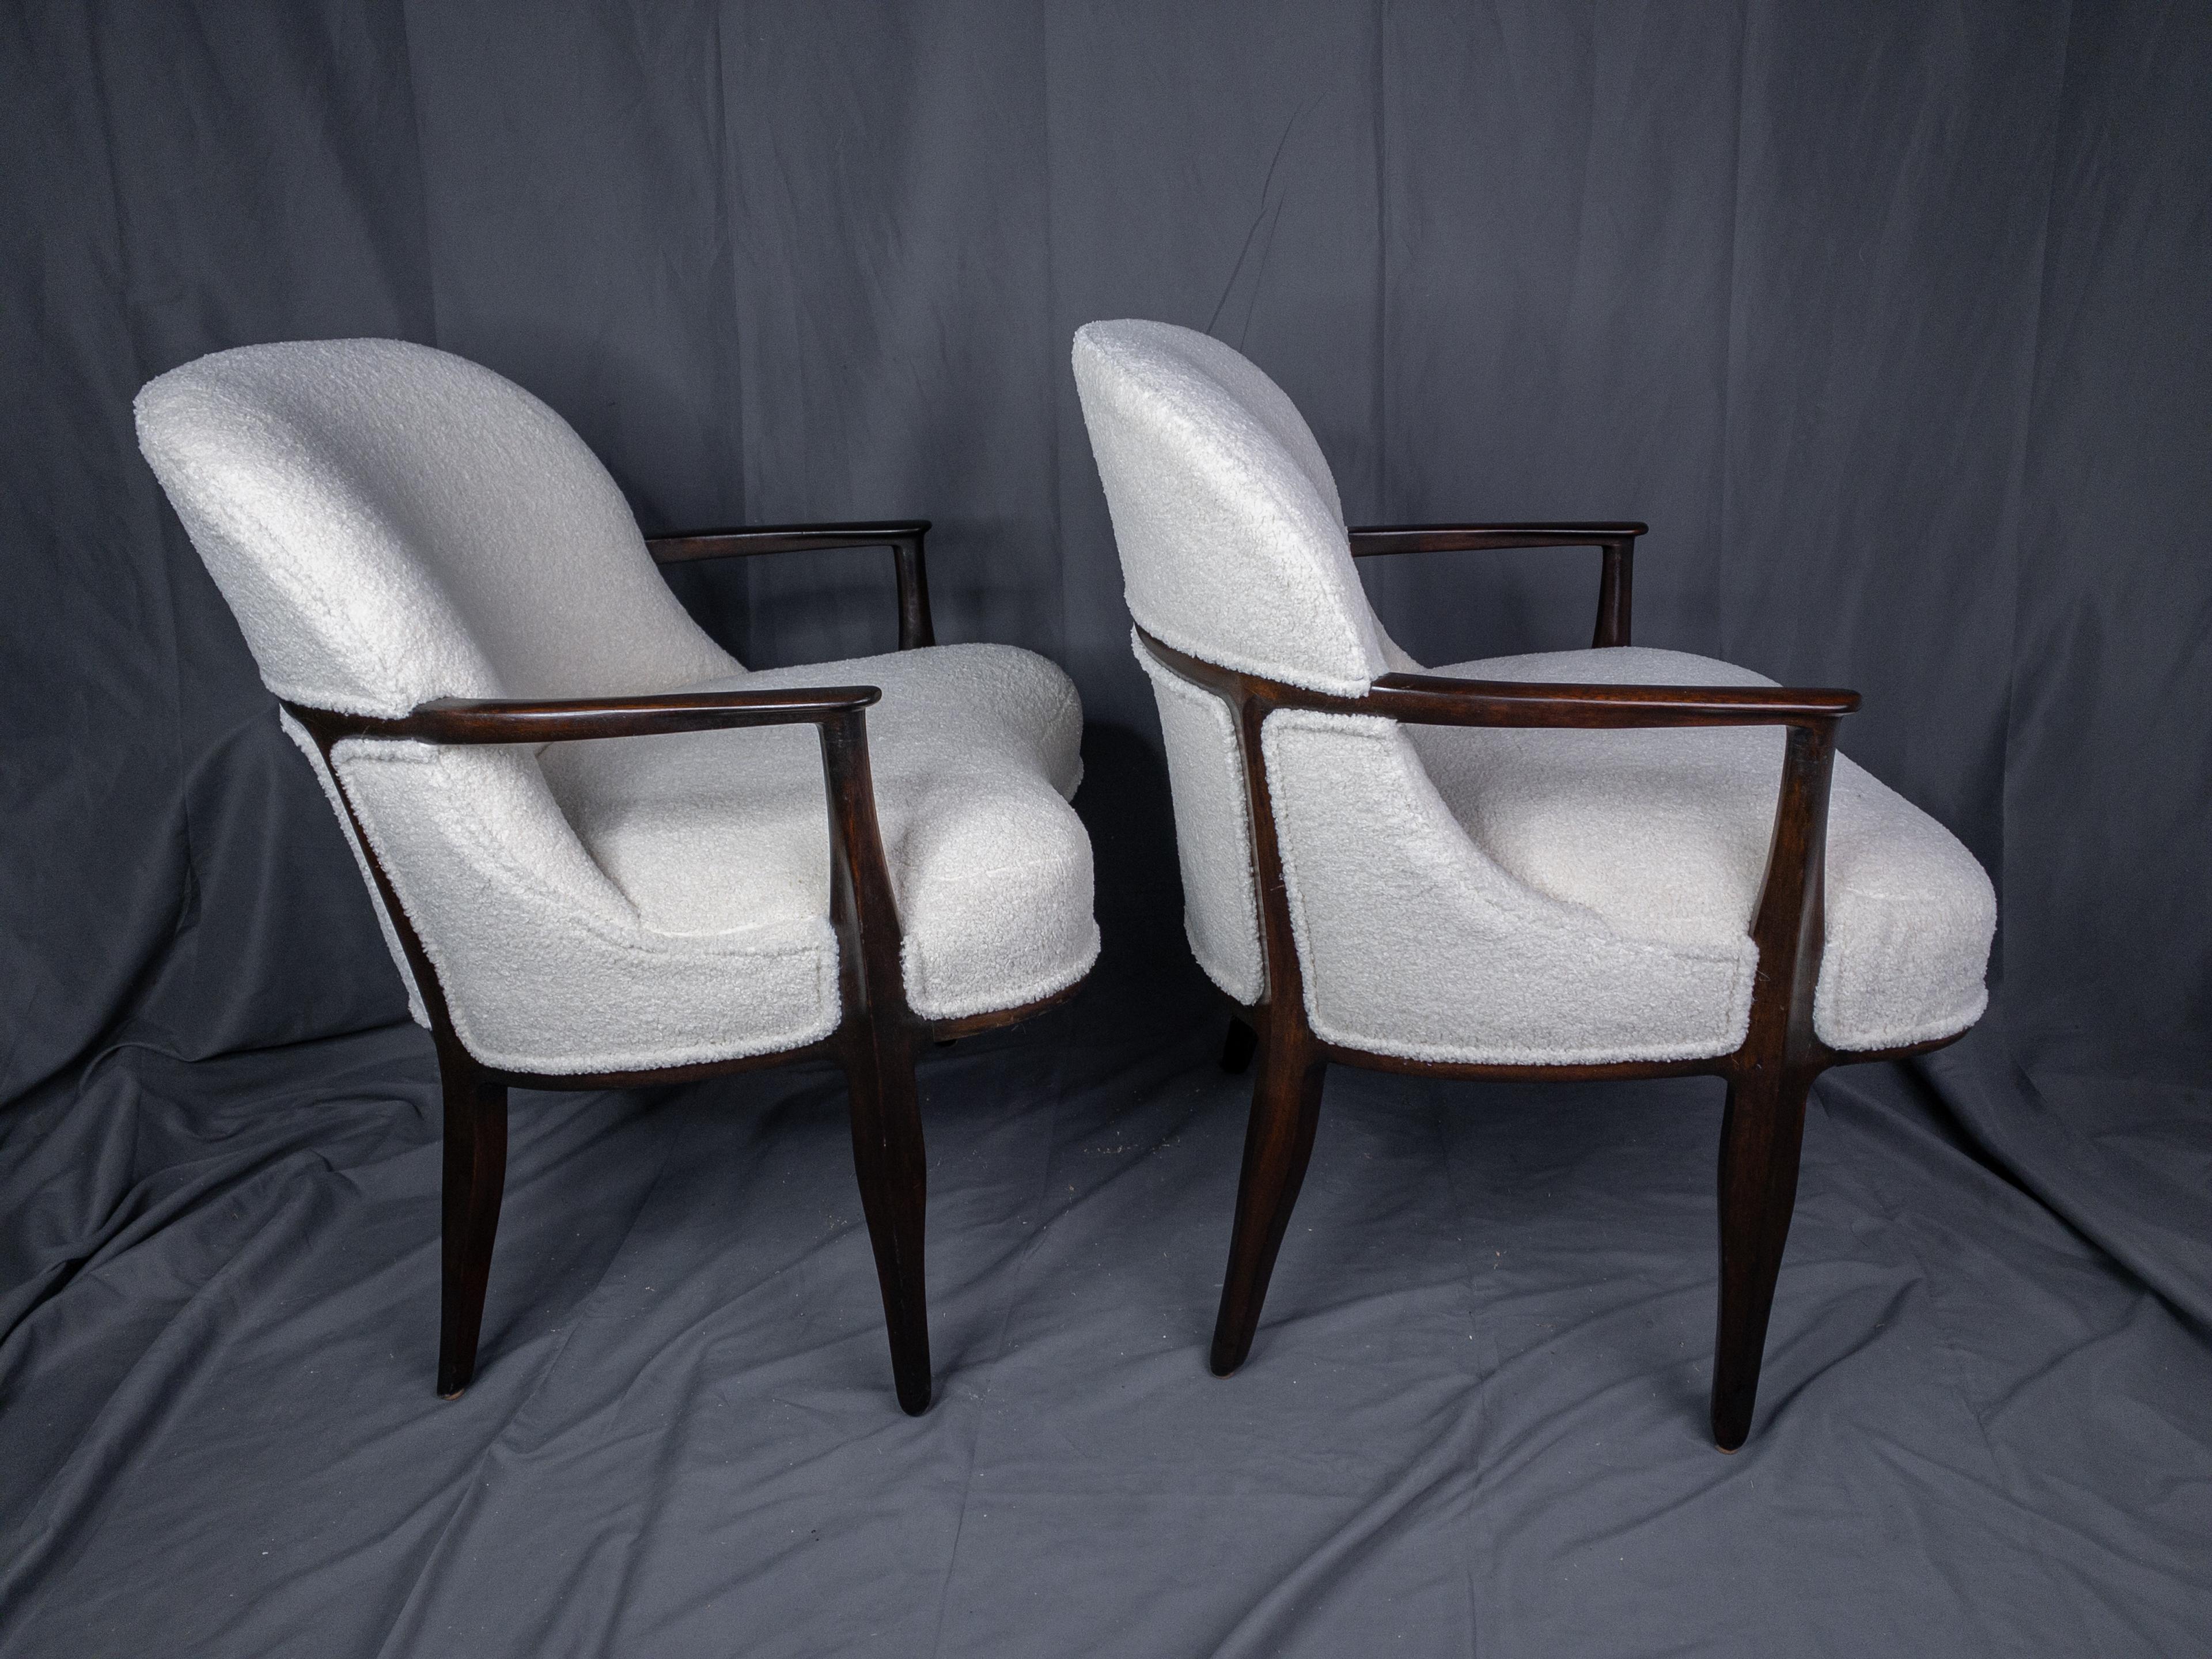 American Pair of Edward Wormley Rosewood Janus Lounge Chairs in Bouclé Fabric for Dunbar For Sale